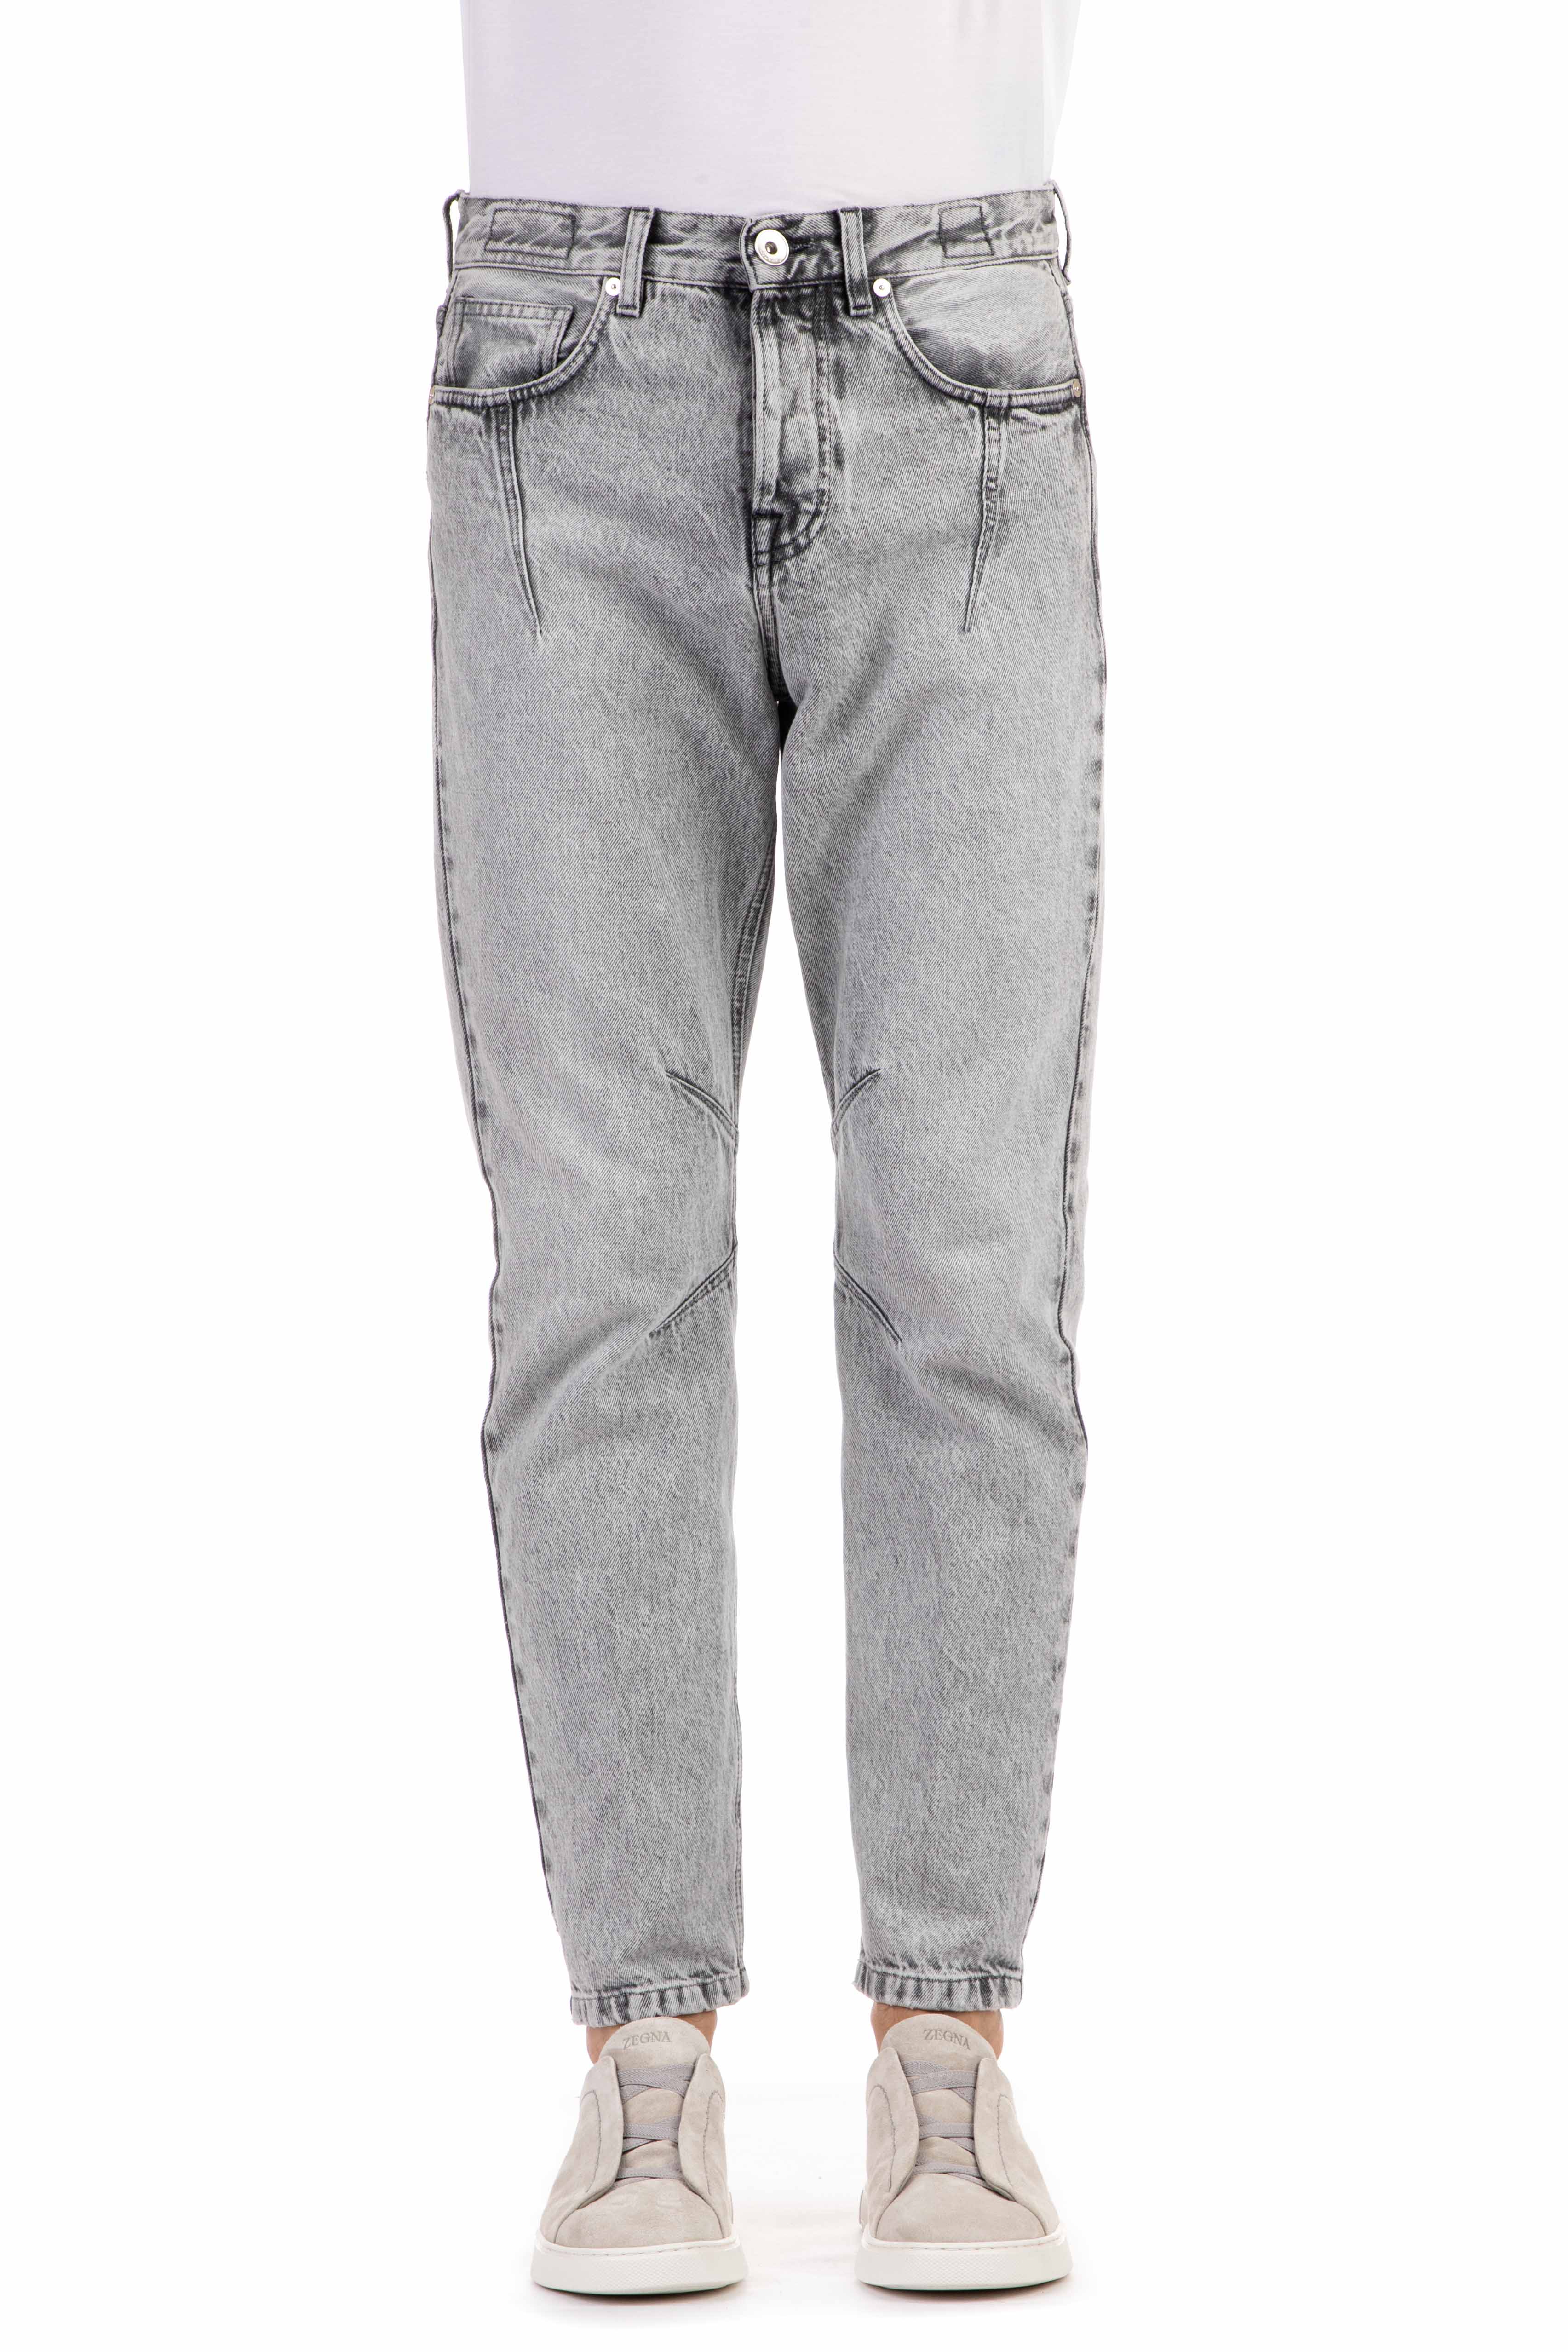 Gray carrot fit jeans